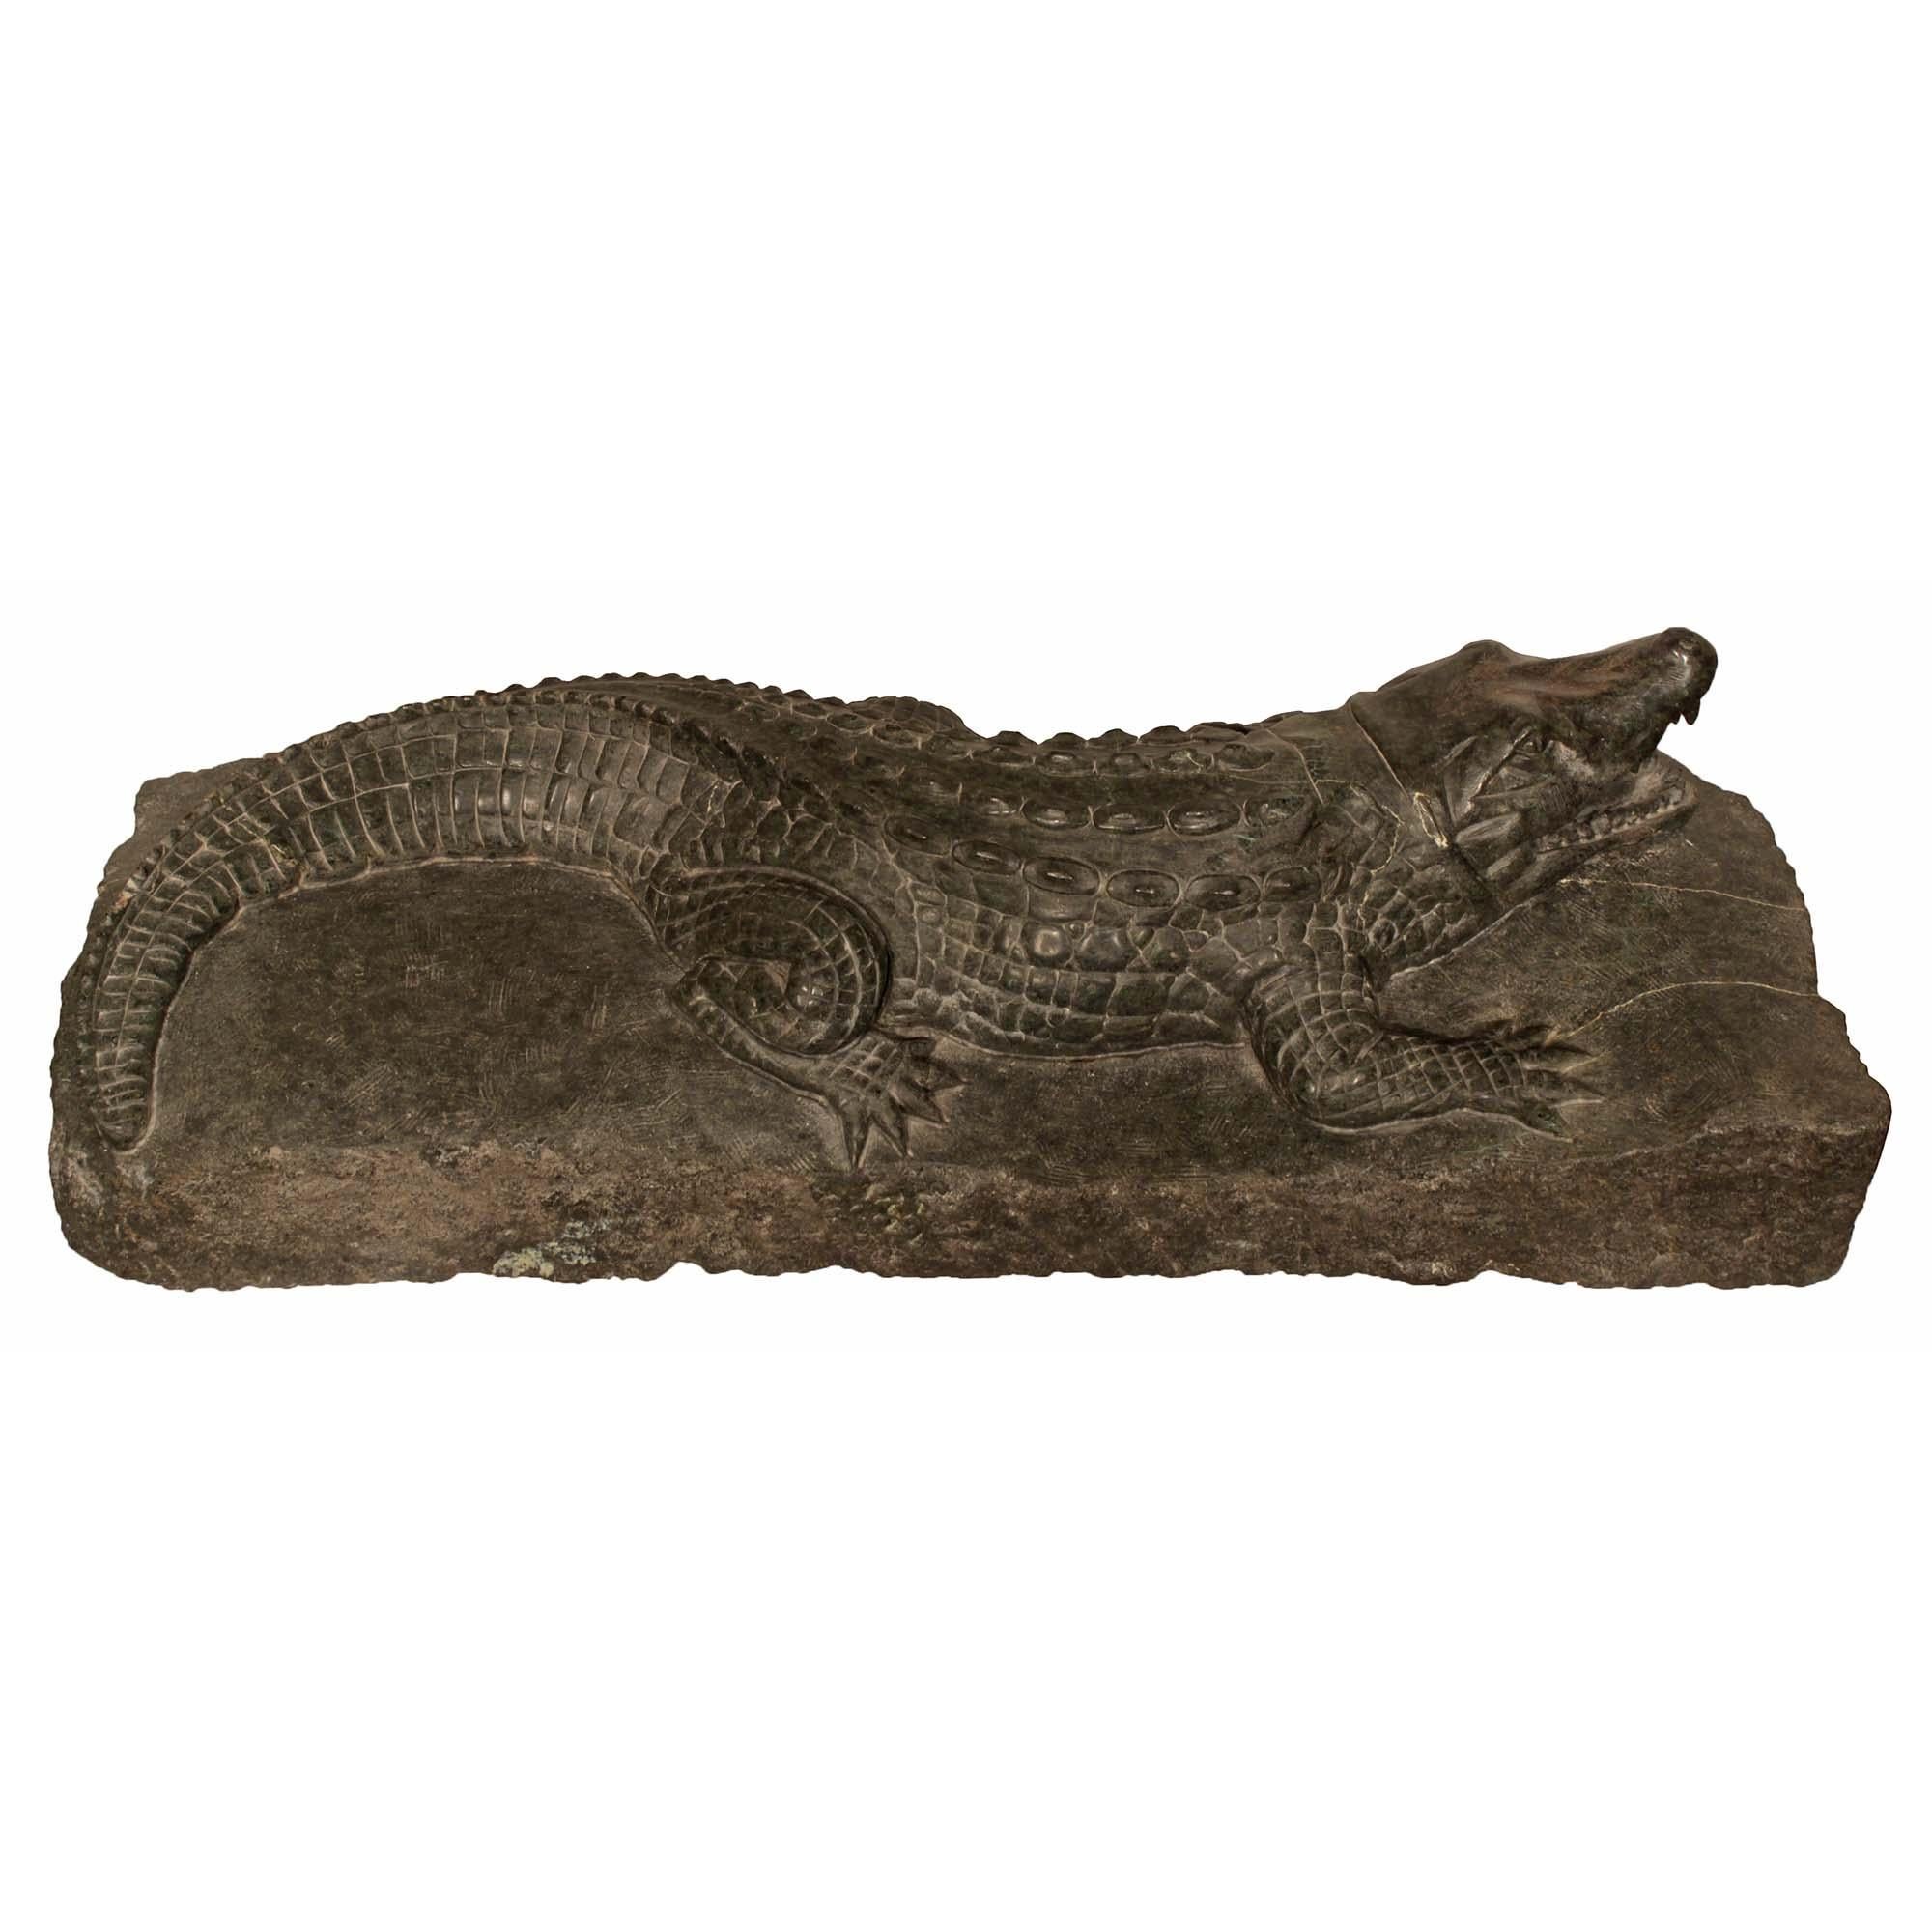 Italian 19th Century Verde Prato Marble Alligator Sculpture, from Florence For Sale 1